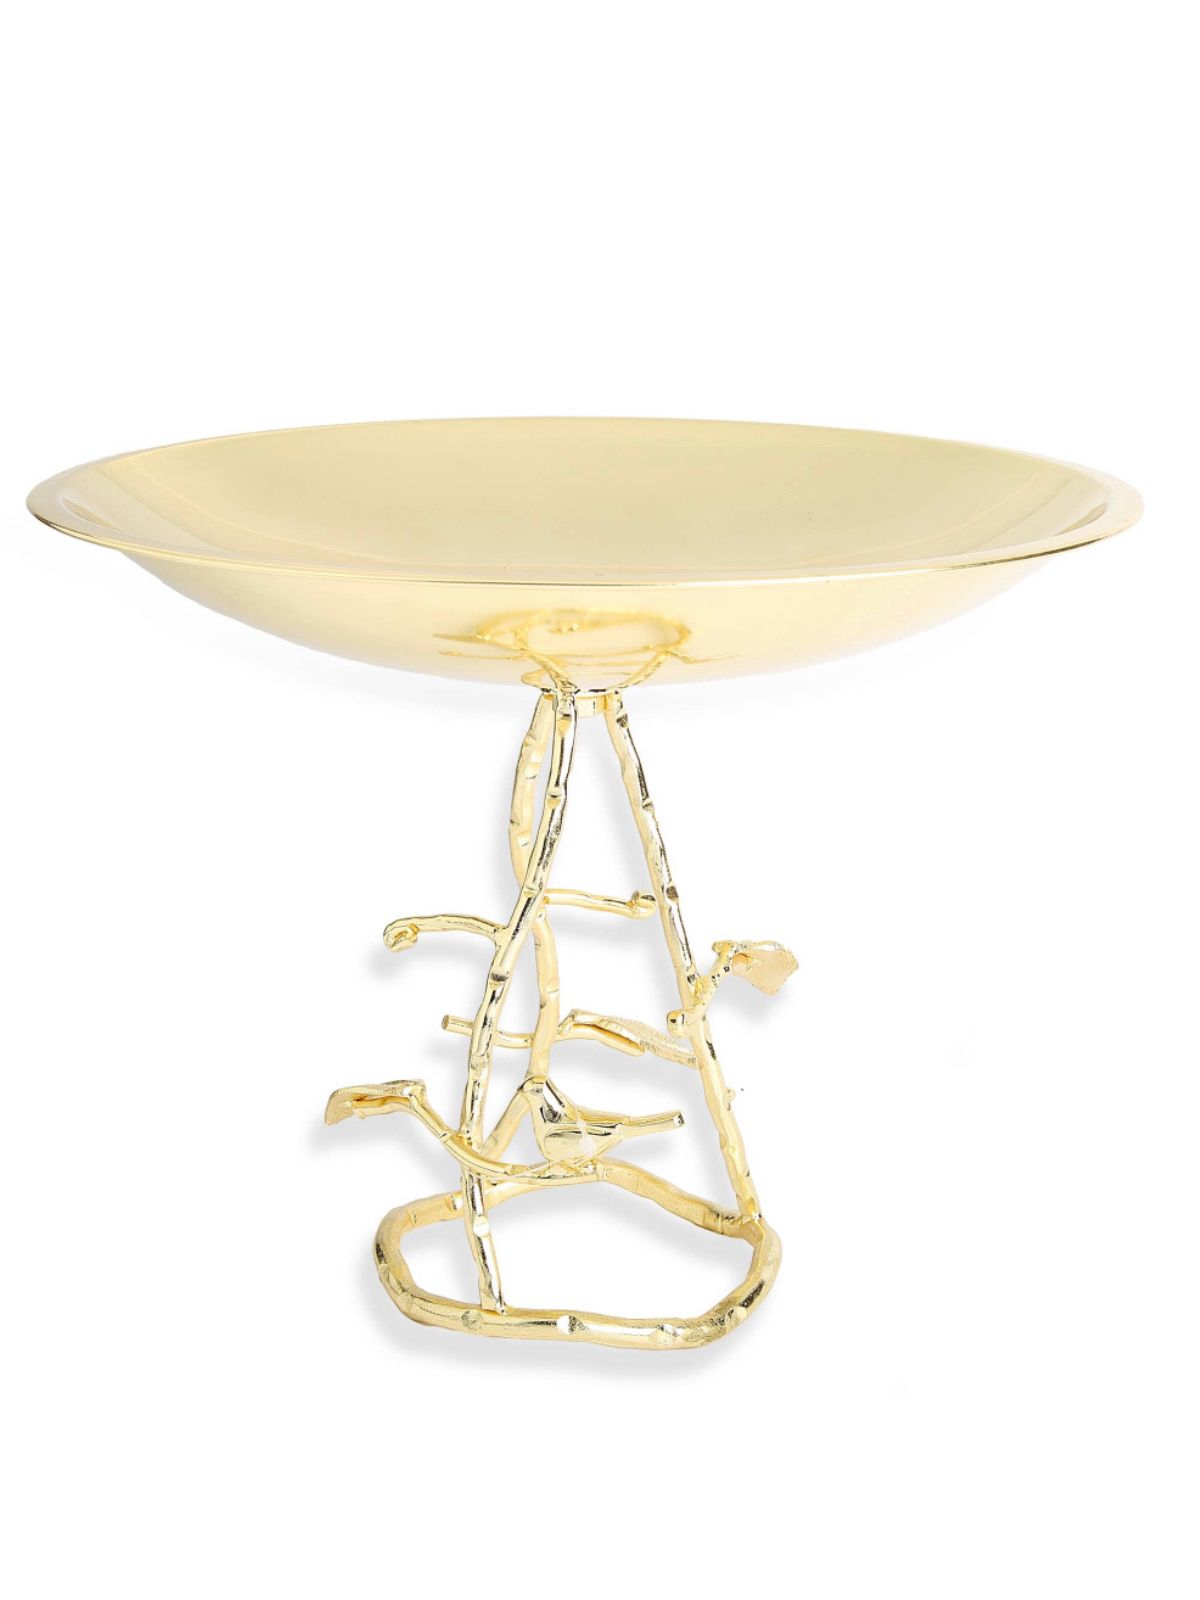 11.75D Stainless Steel Gold Raised Bowl on Leaf Base Sold by KYA Home Decor.